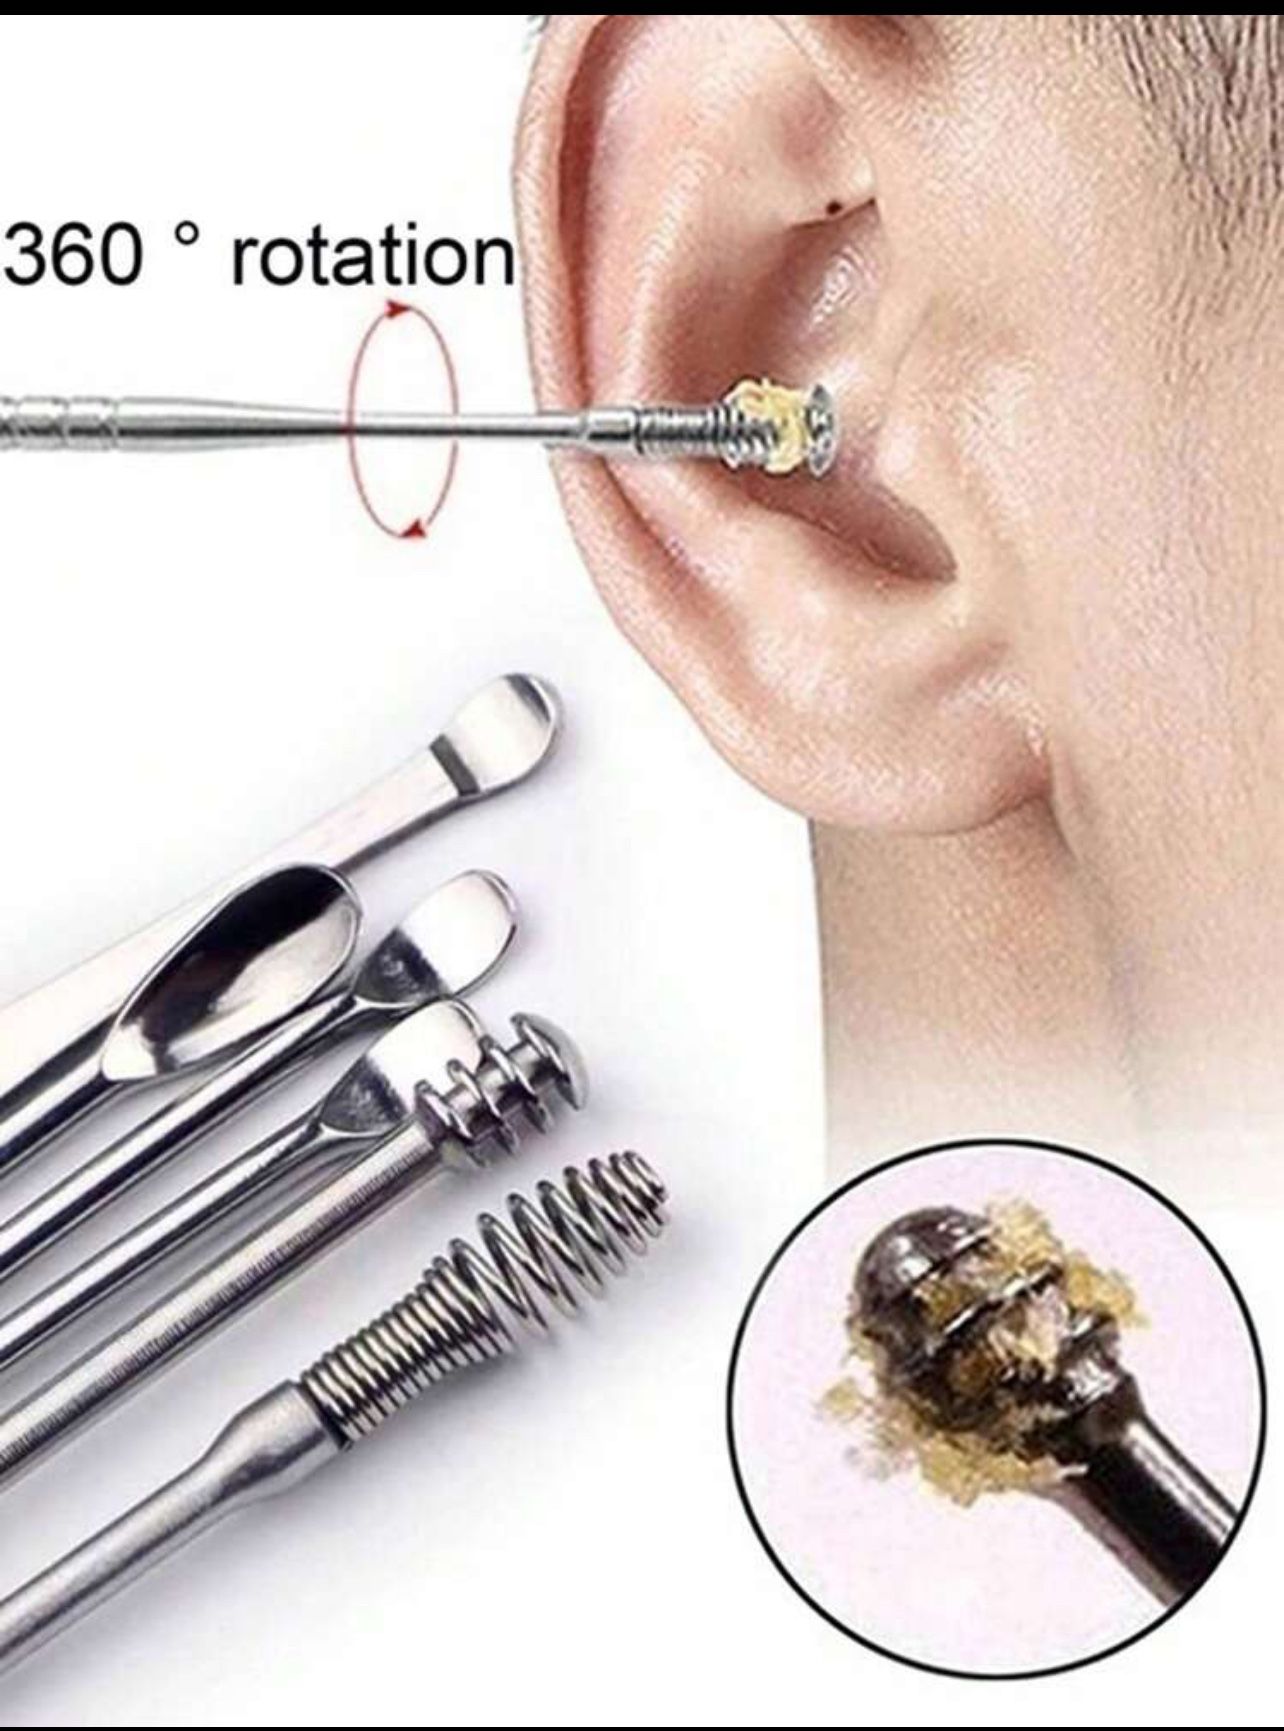 6pcs/Set Stainless Steel Earwax Removal Tool Kit, Ear Cleaner, Ear Cleaning, Living Room Home Bedroom Bathroom House Decor, Travel Stuff, Wedding, Par